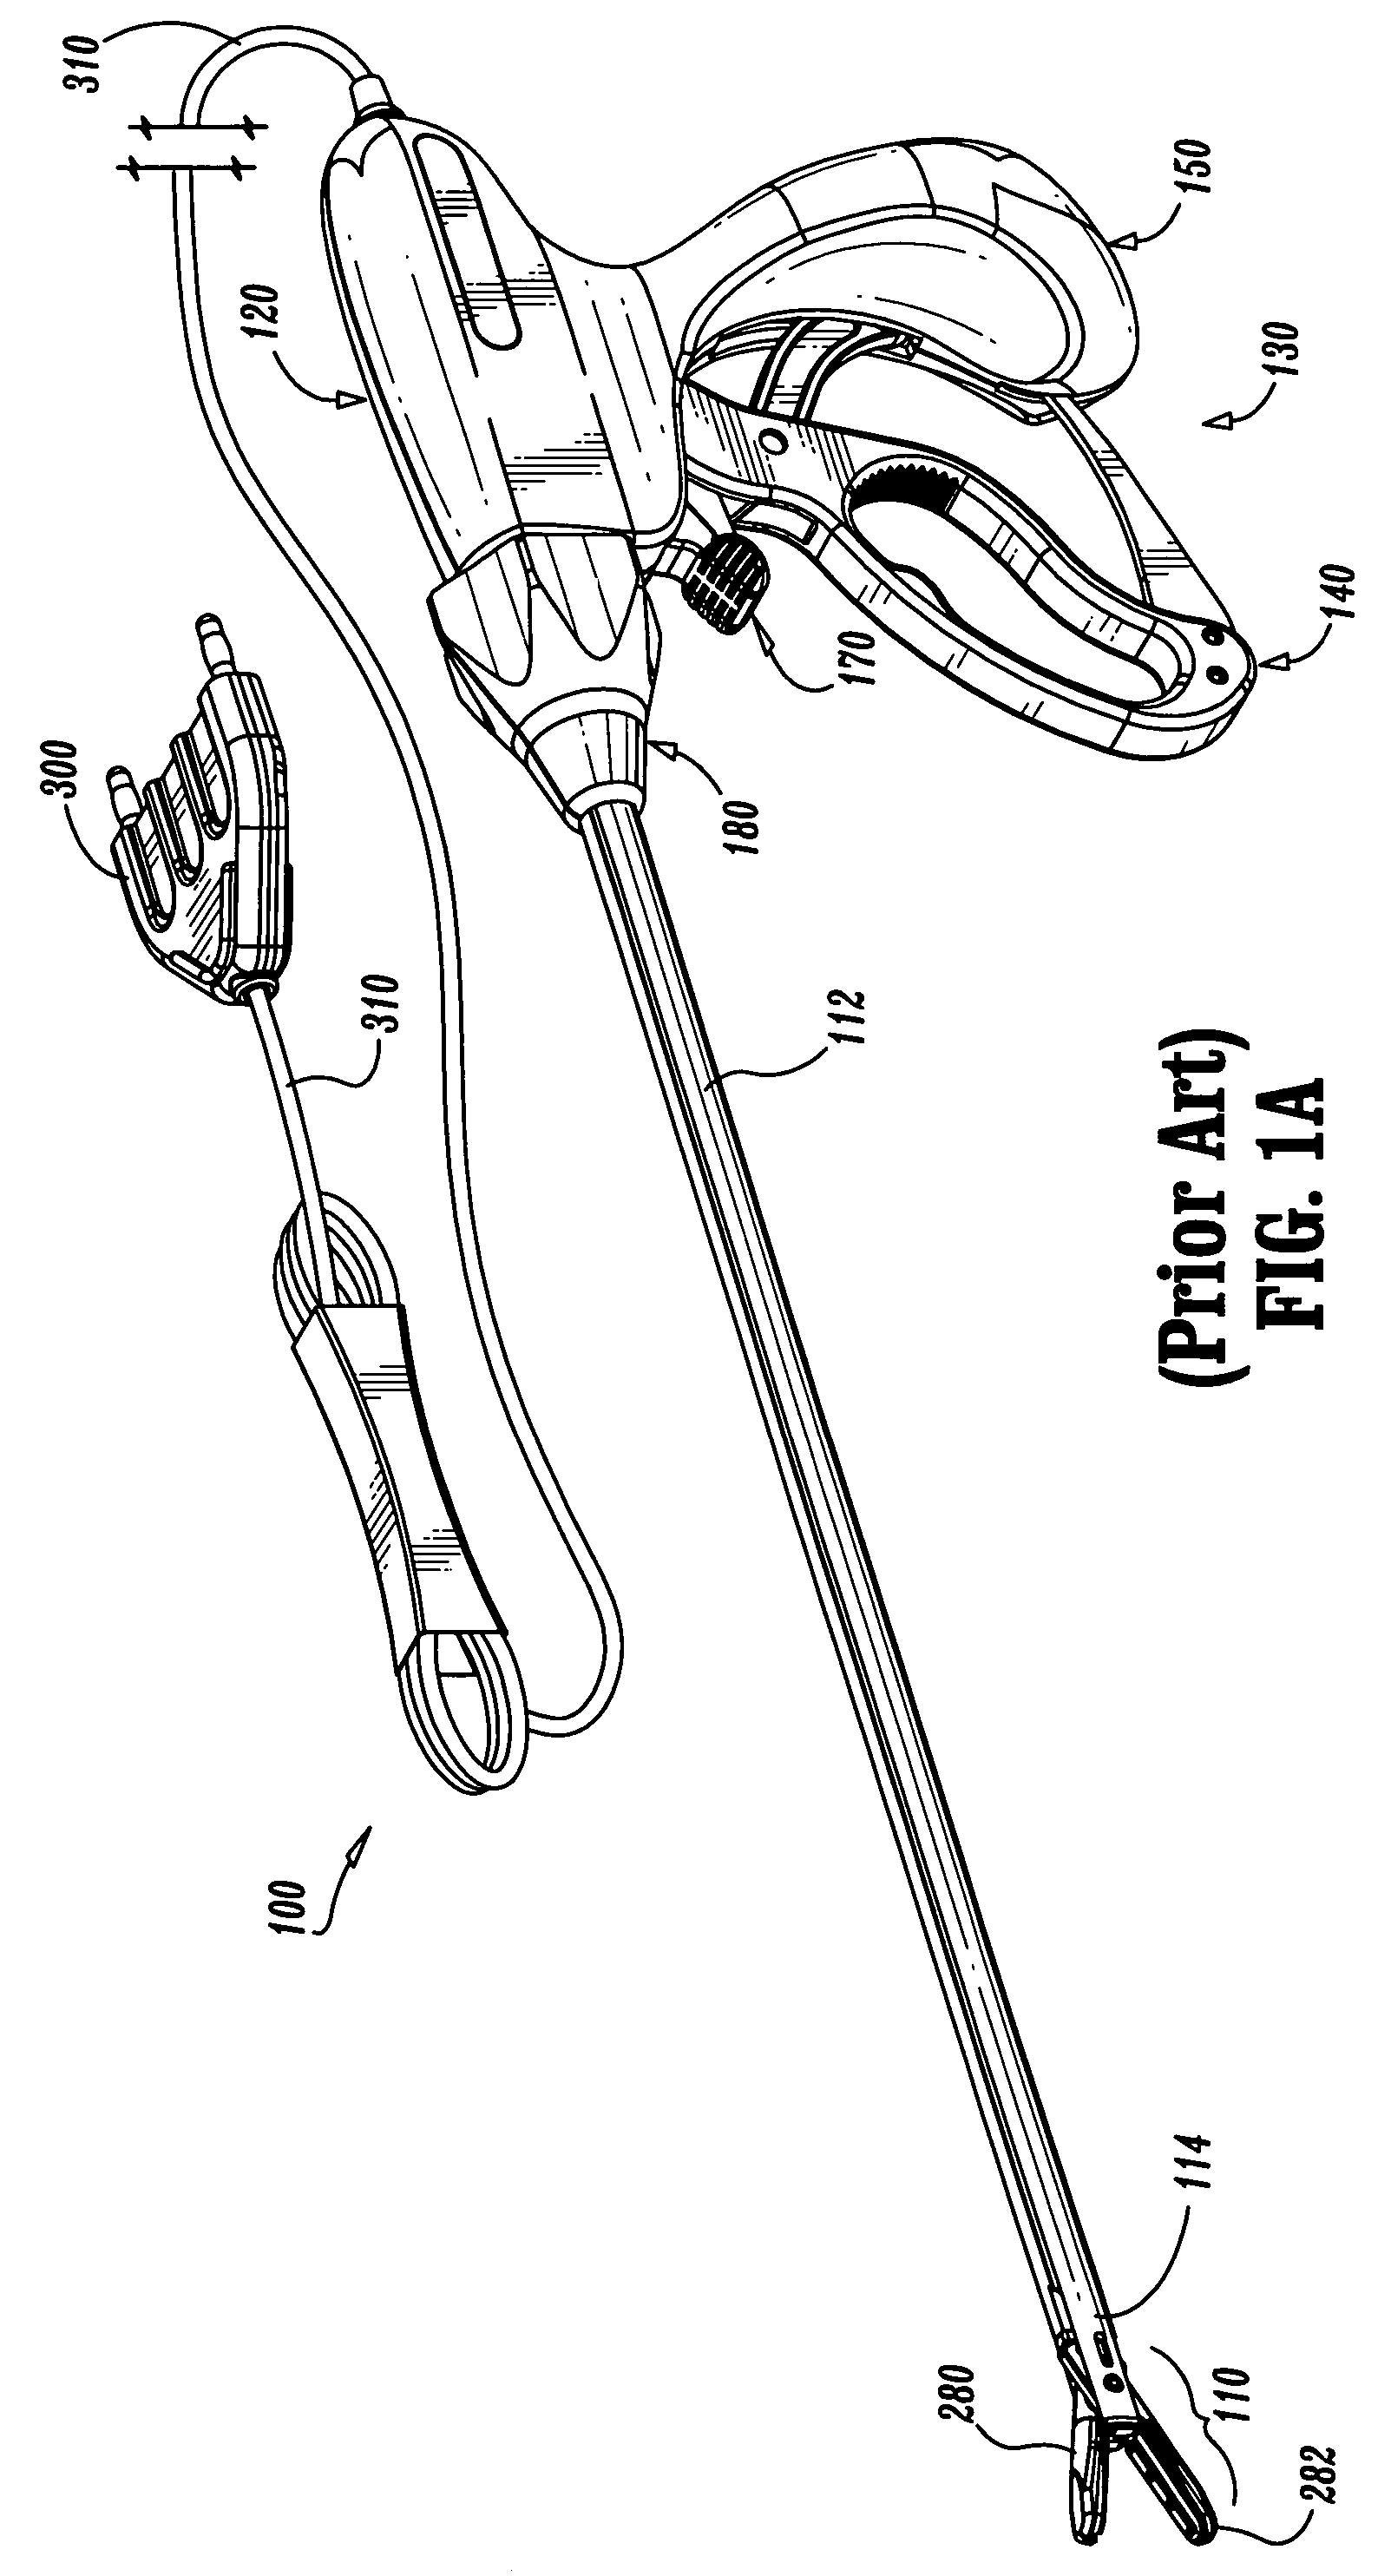 Electrically conductive/insulative over-shoe for tissue fusion